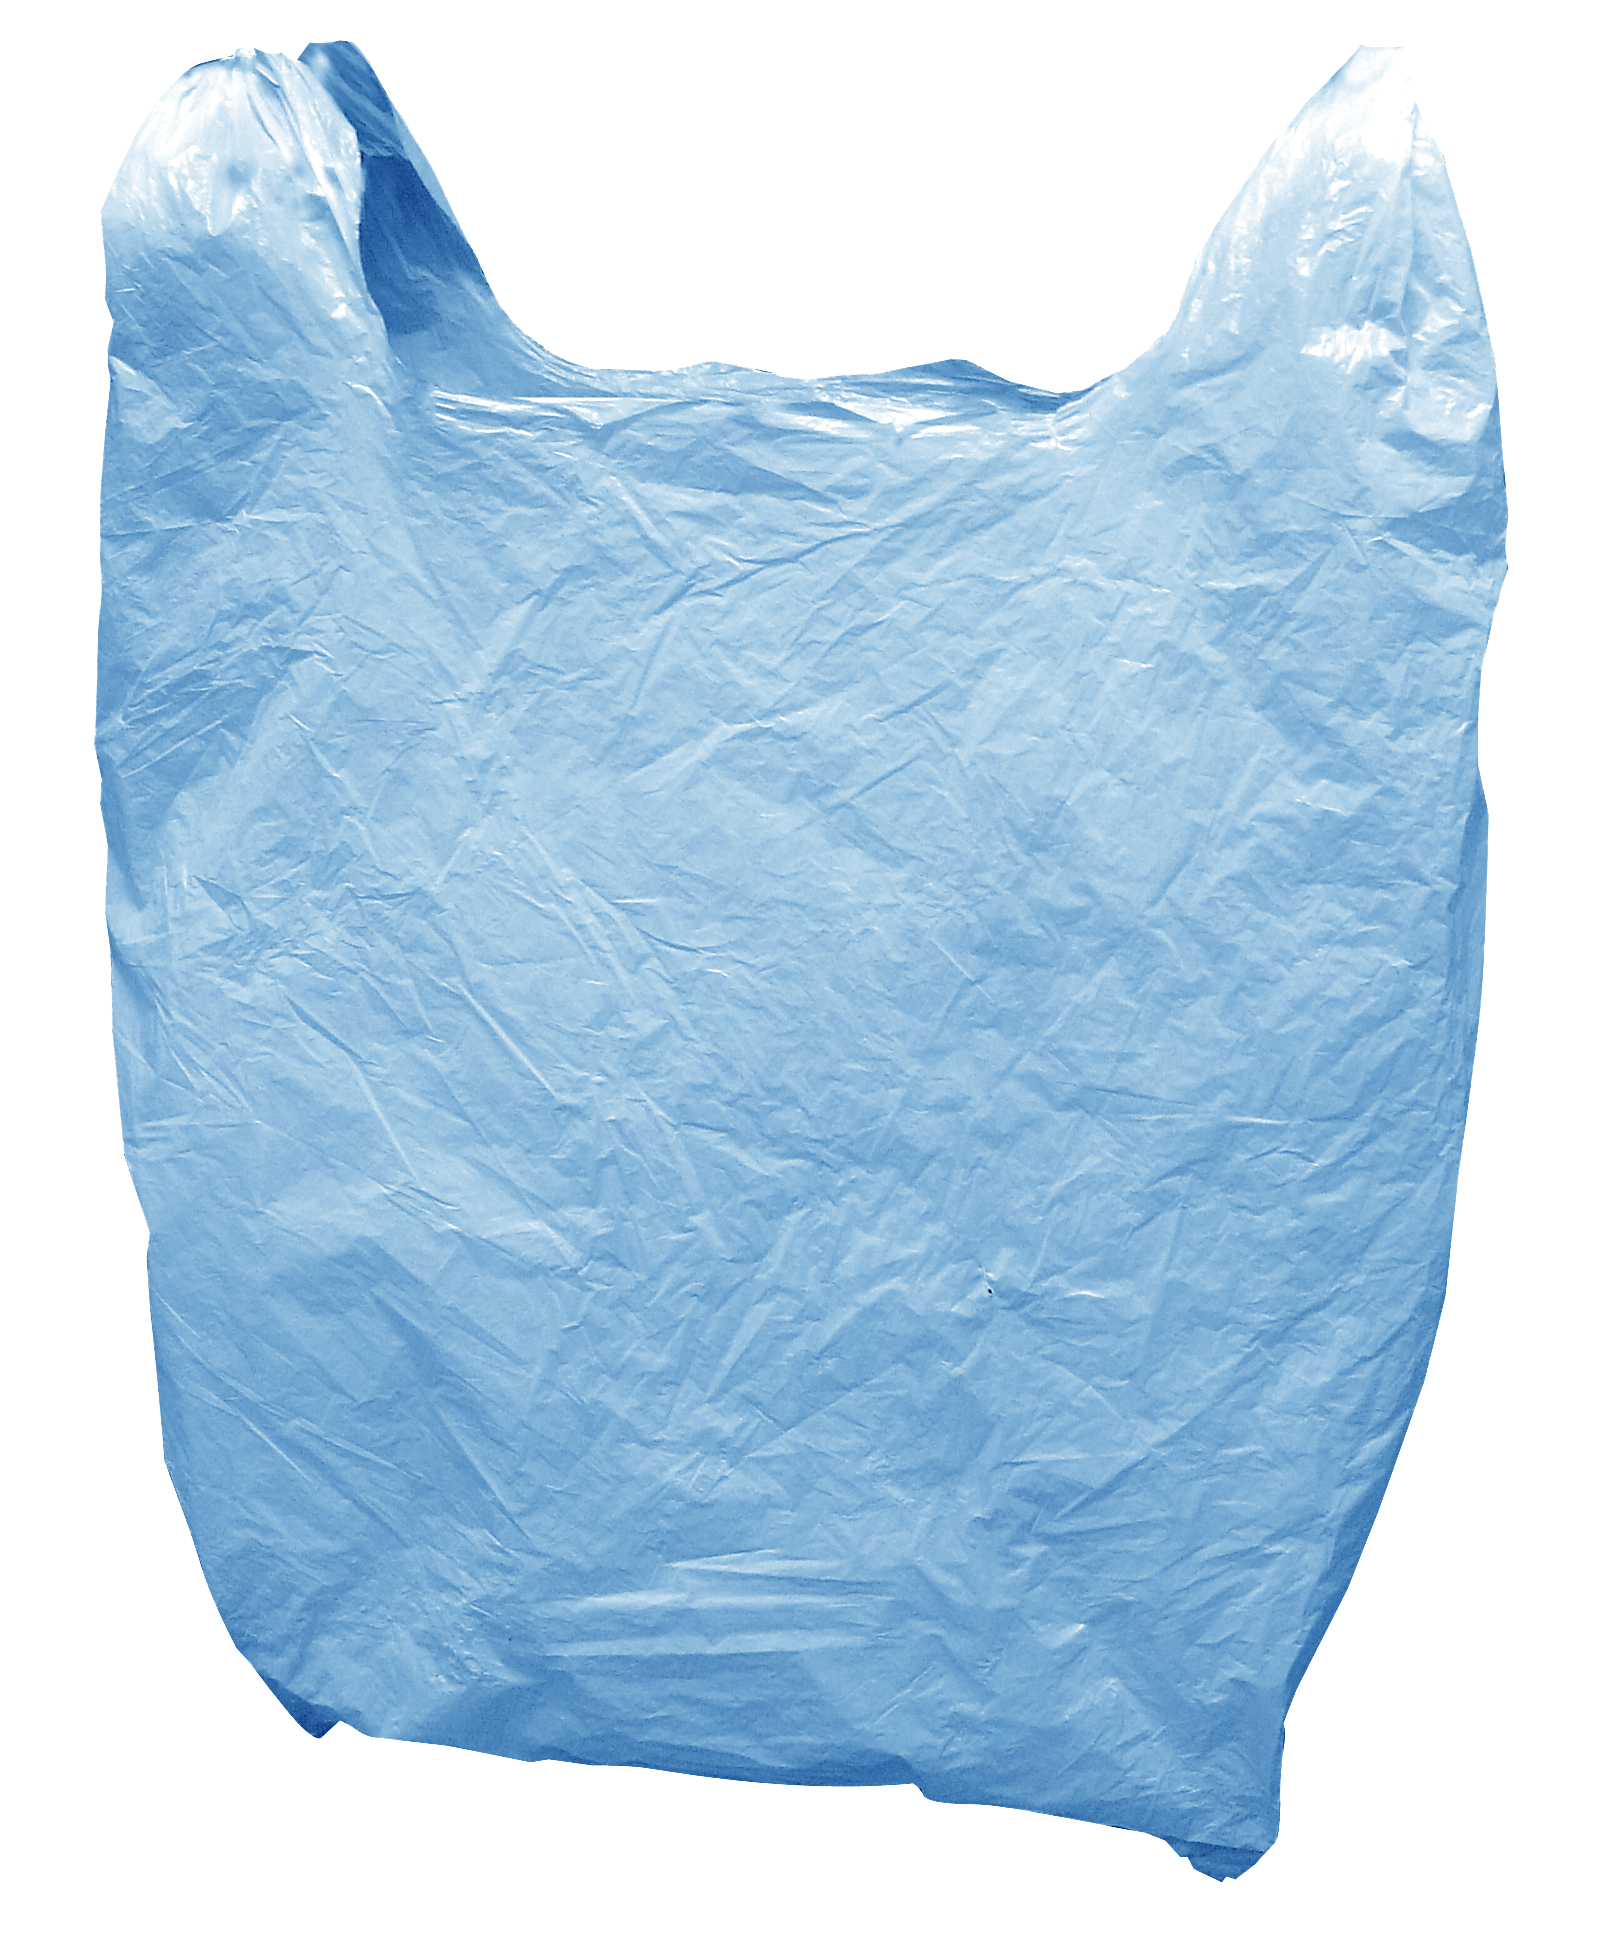 Plastic Bag PNG Picture